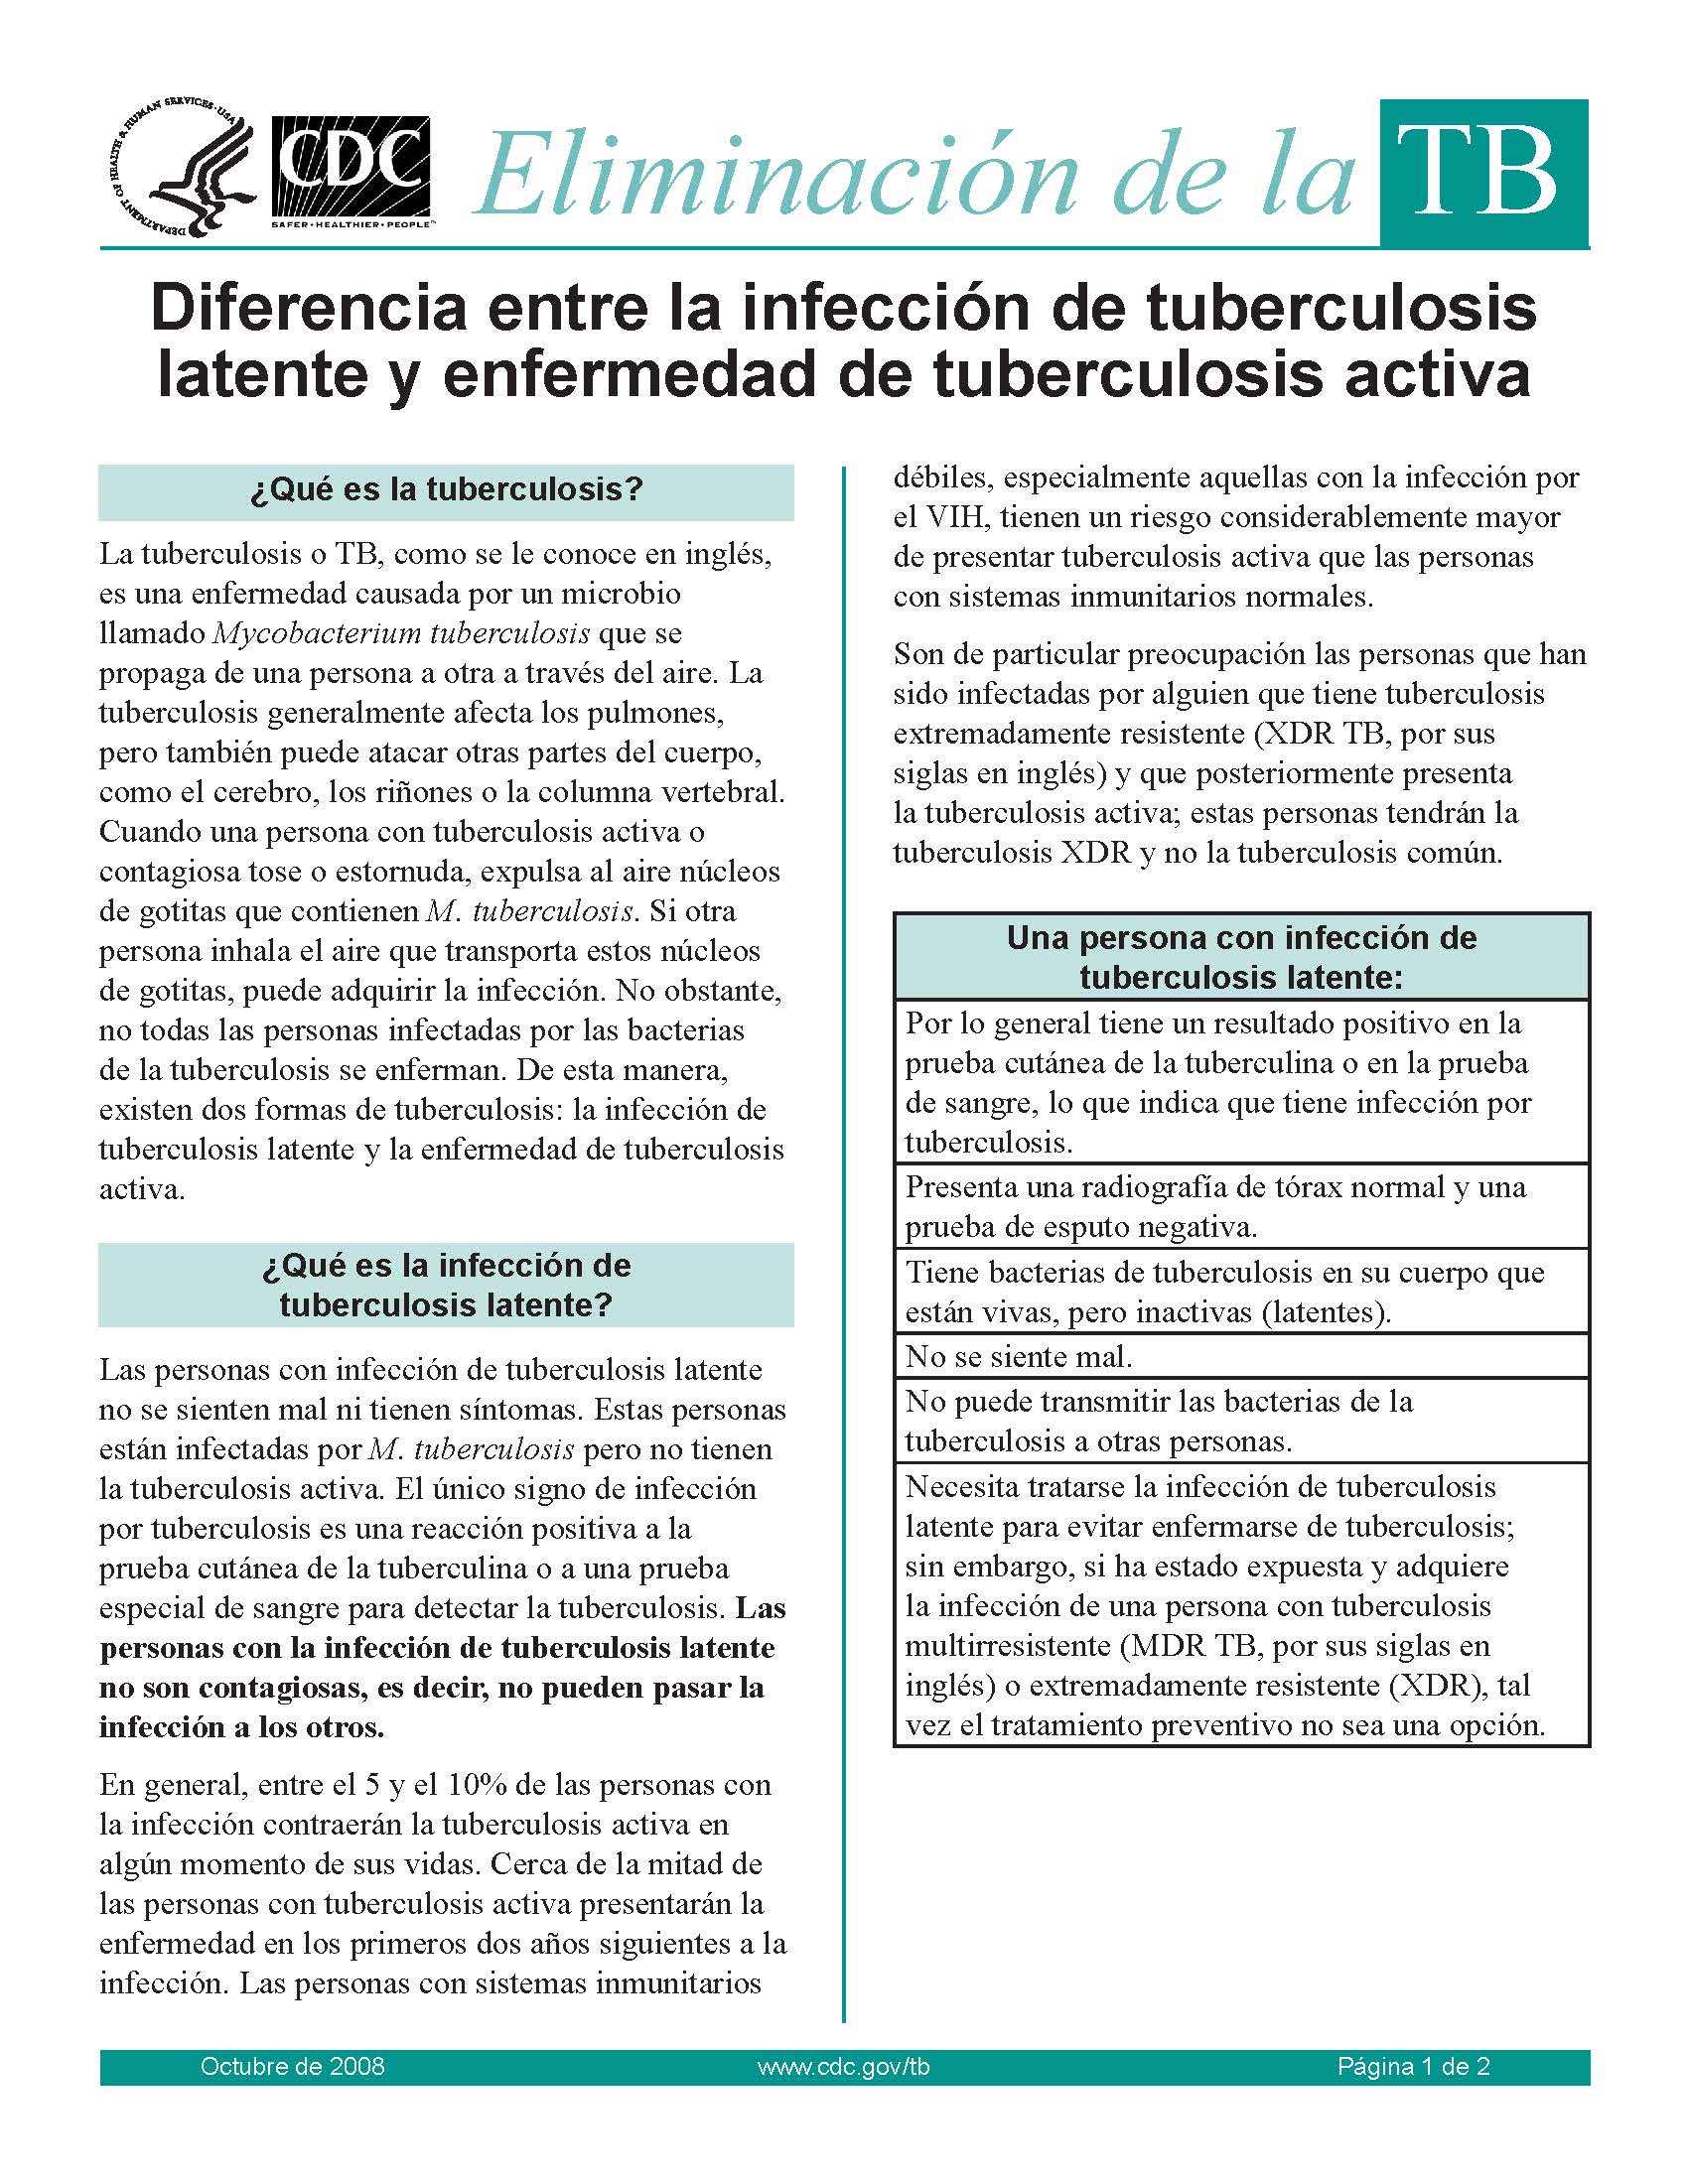 The Difference between LTBI and TB Disease (Spanish) pdf image